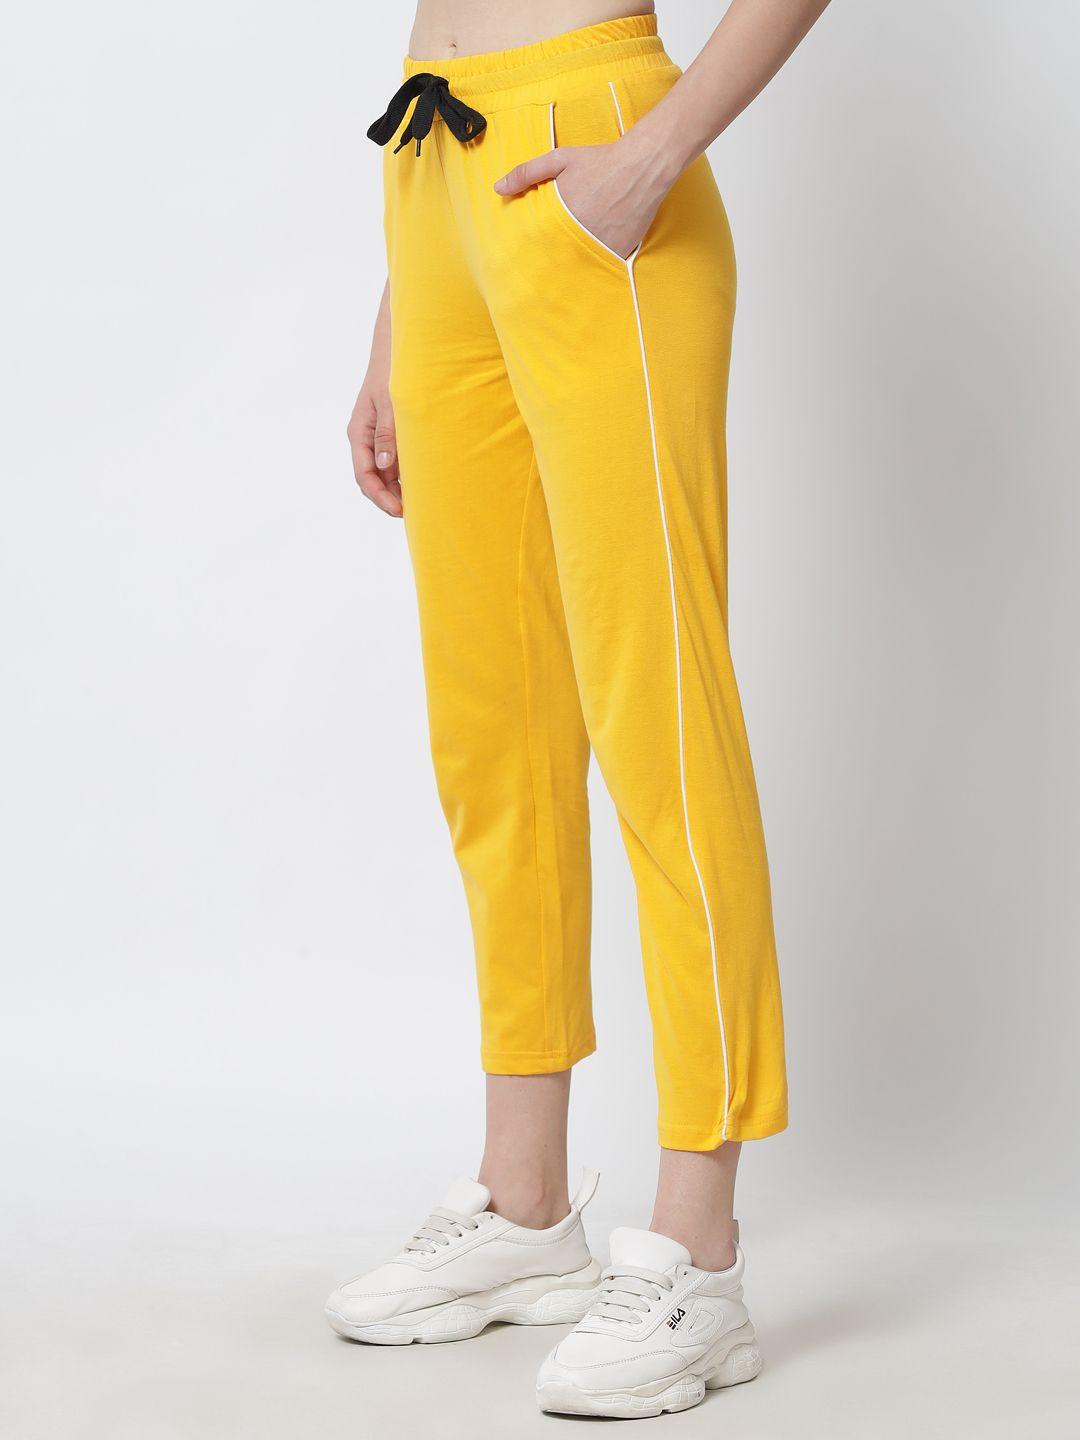 q-rious women yellow solid cotton track pants